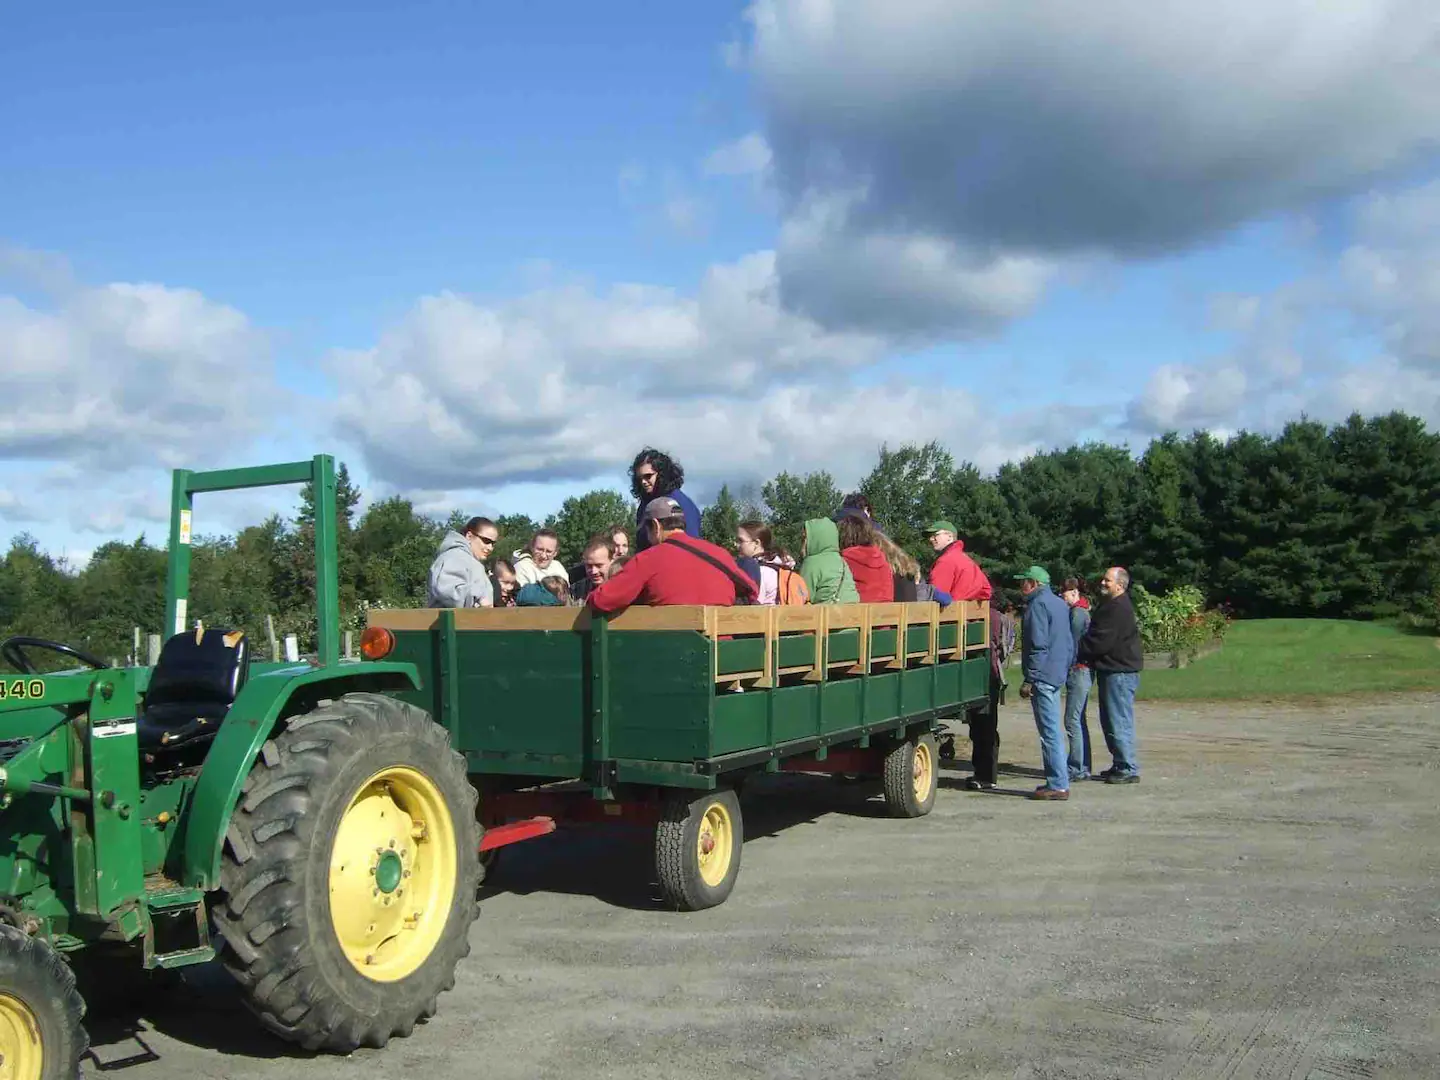 People enjoying a tractor ride at Alyson's Orchard